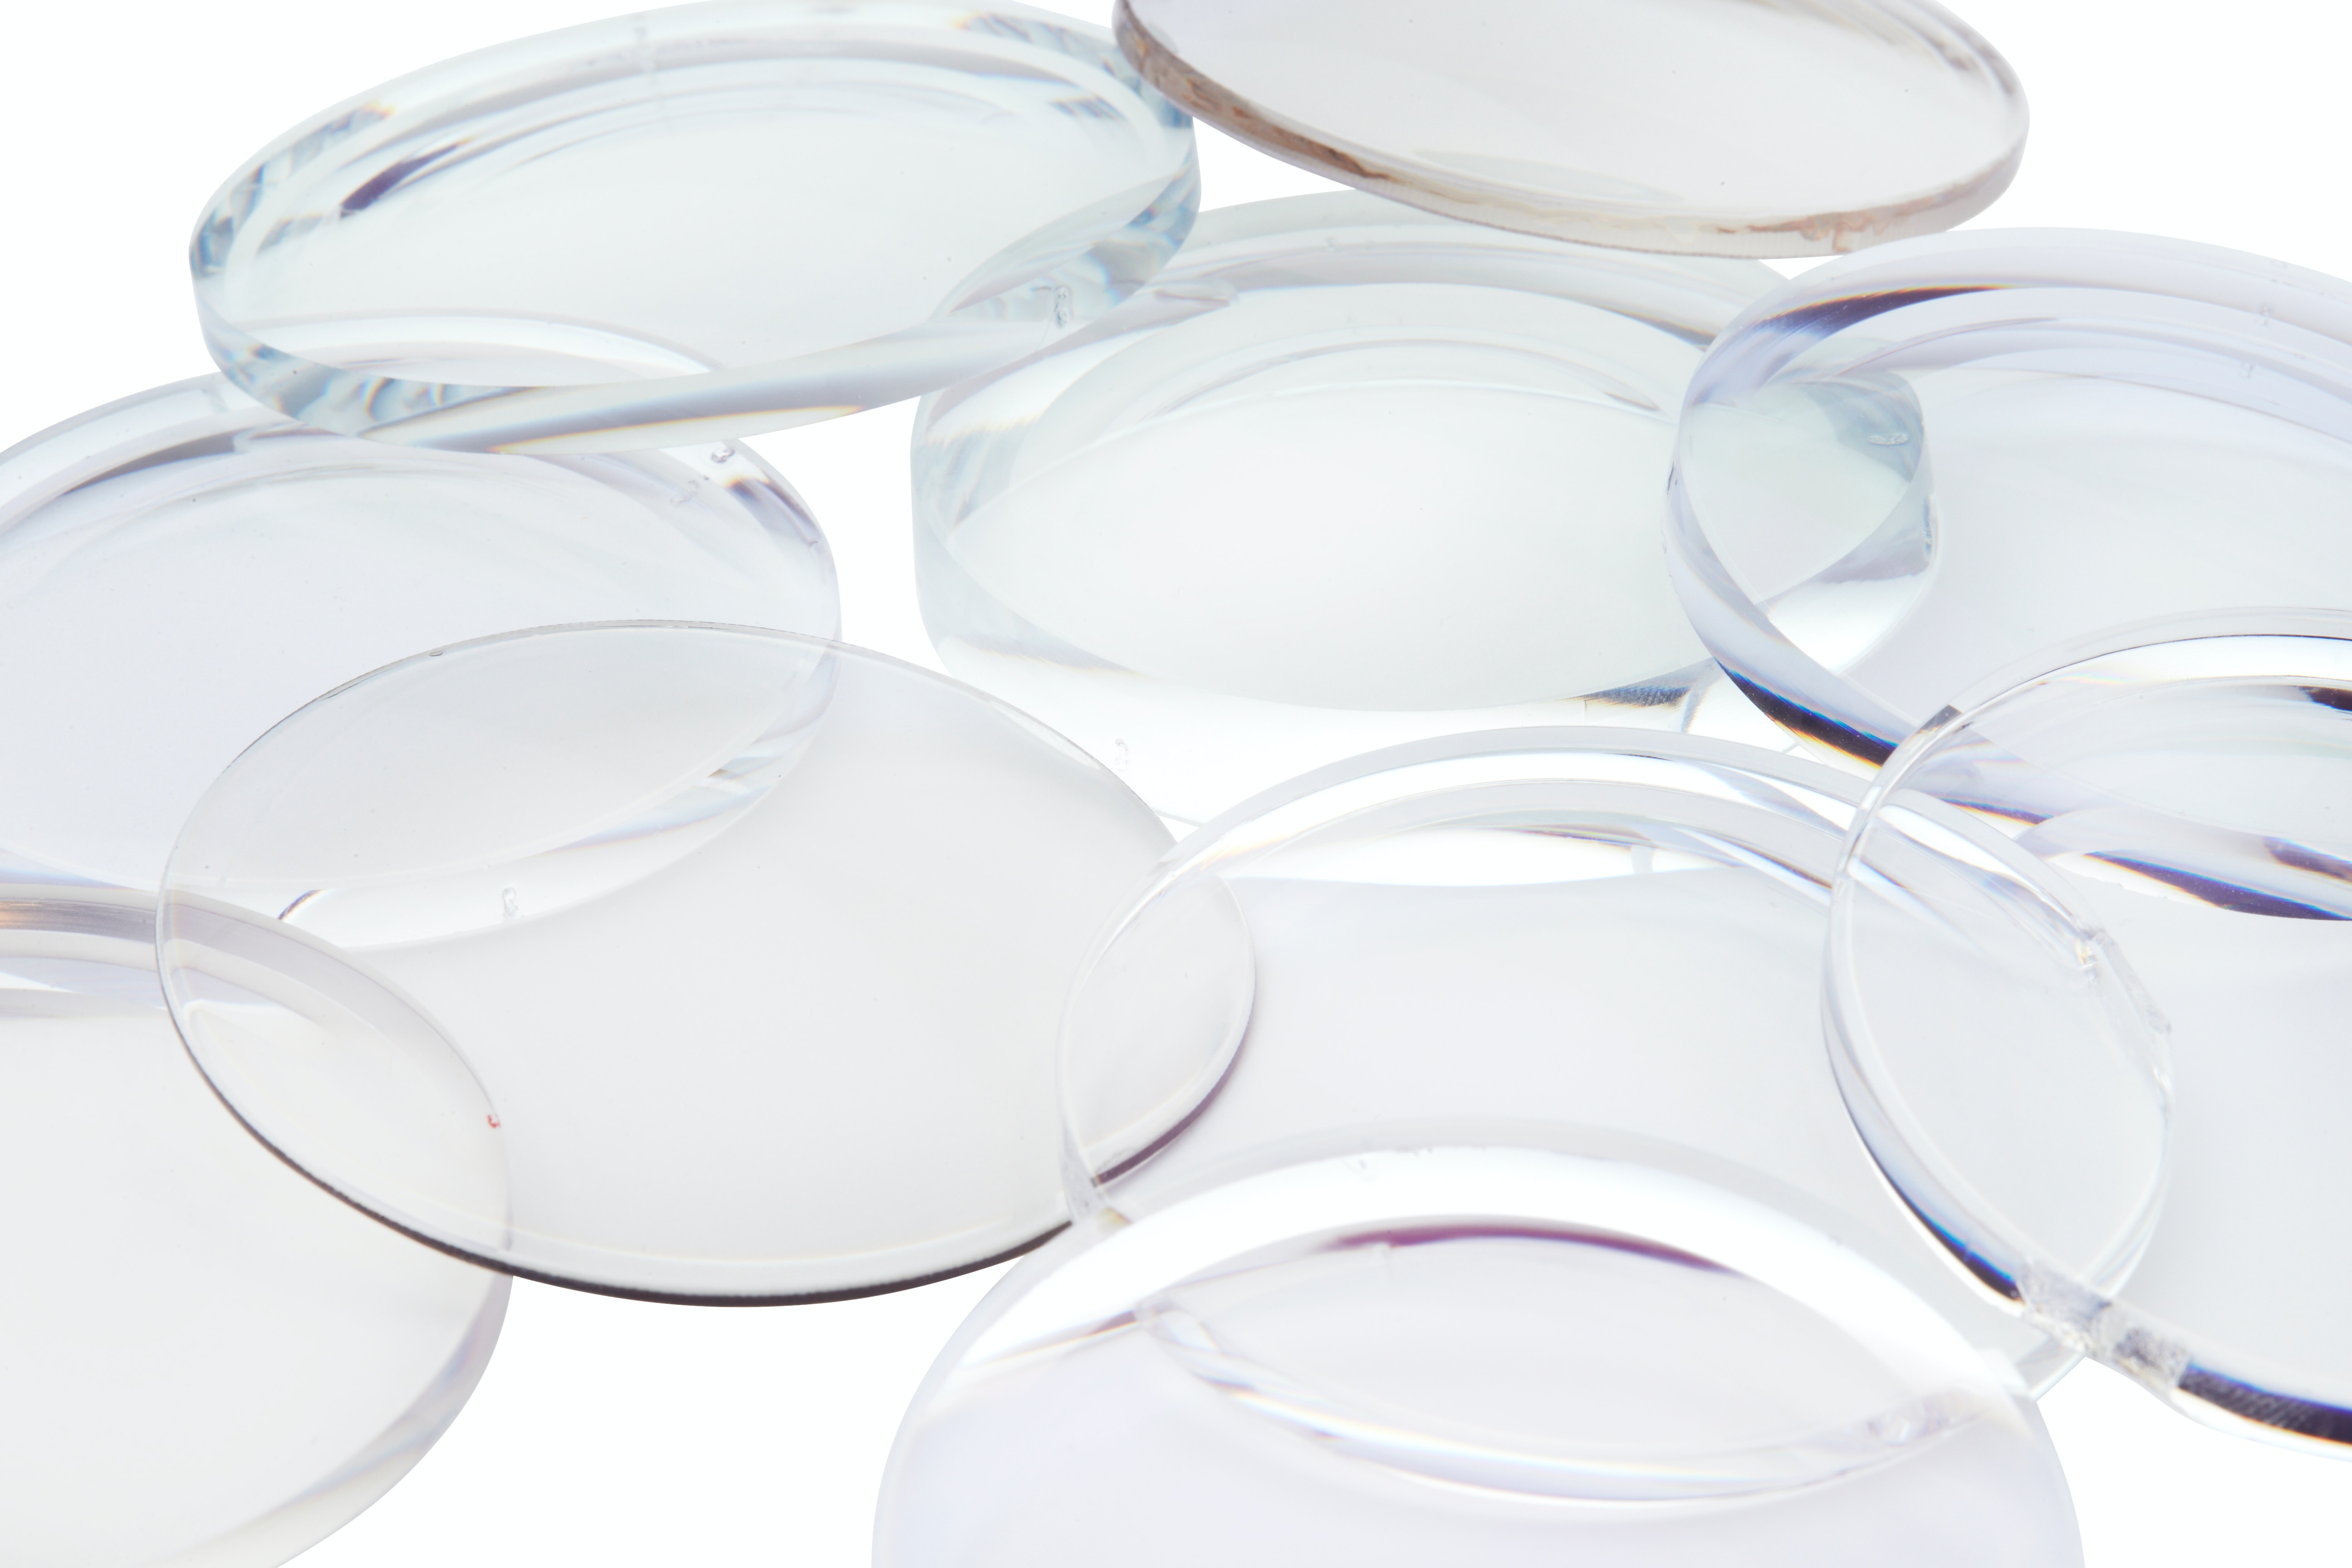 Best place for contact lenses in baltimore